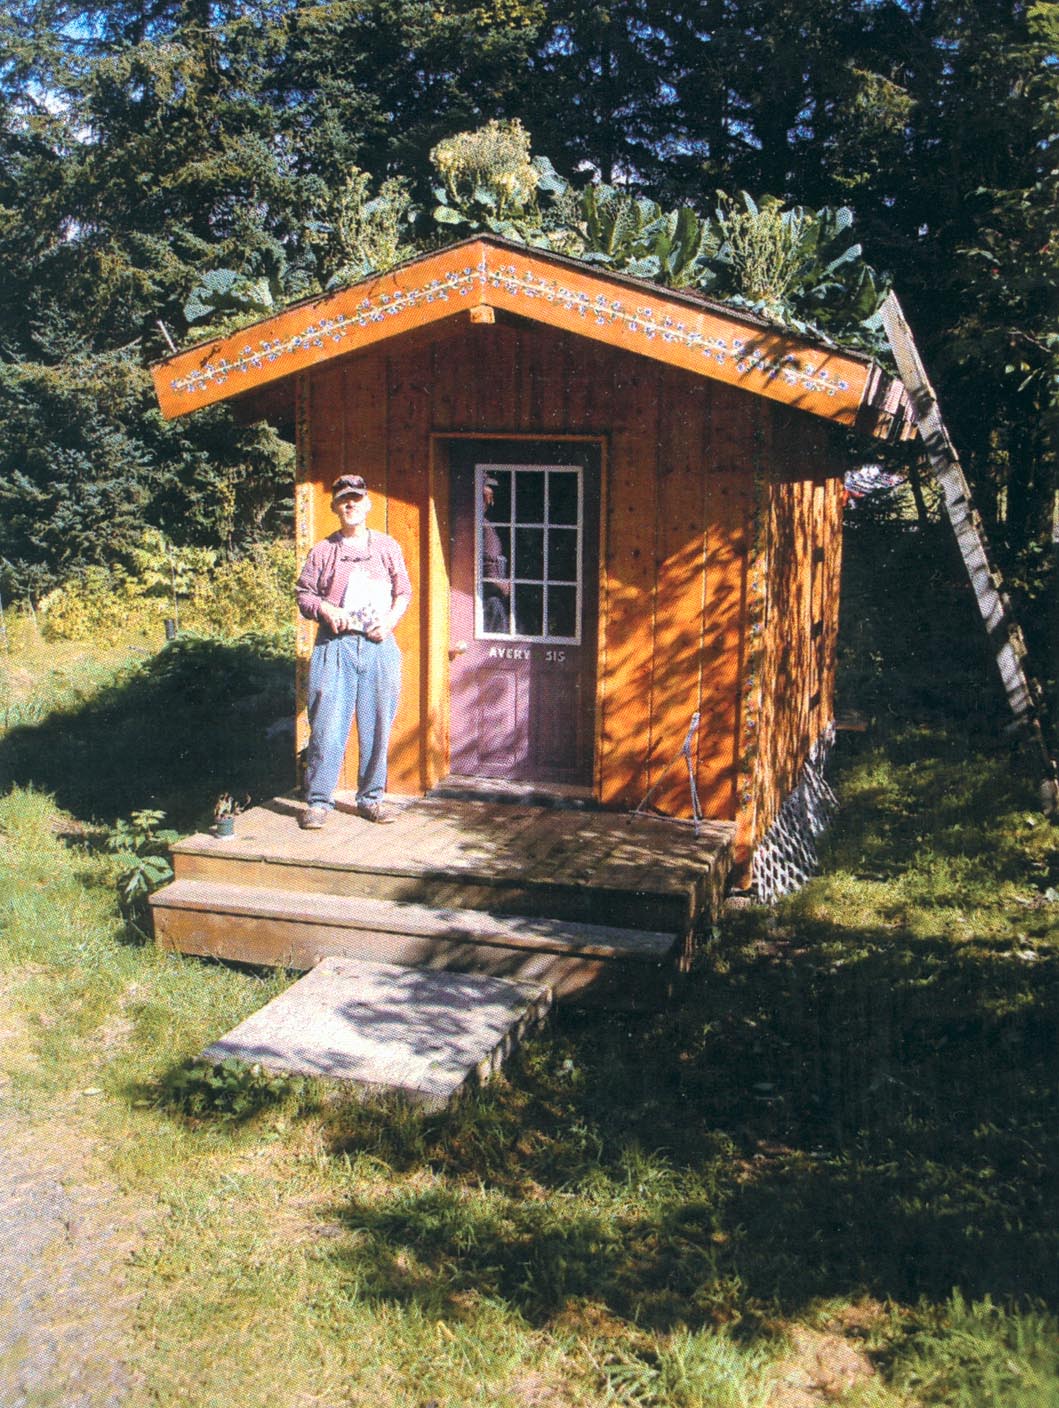 Jack Polster stands by his sod-roof cabin on Ocean Drive. -Photo provided